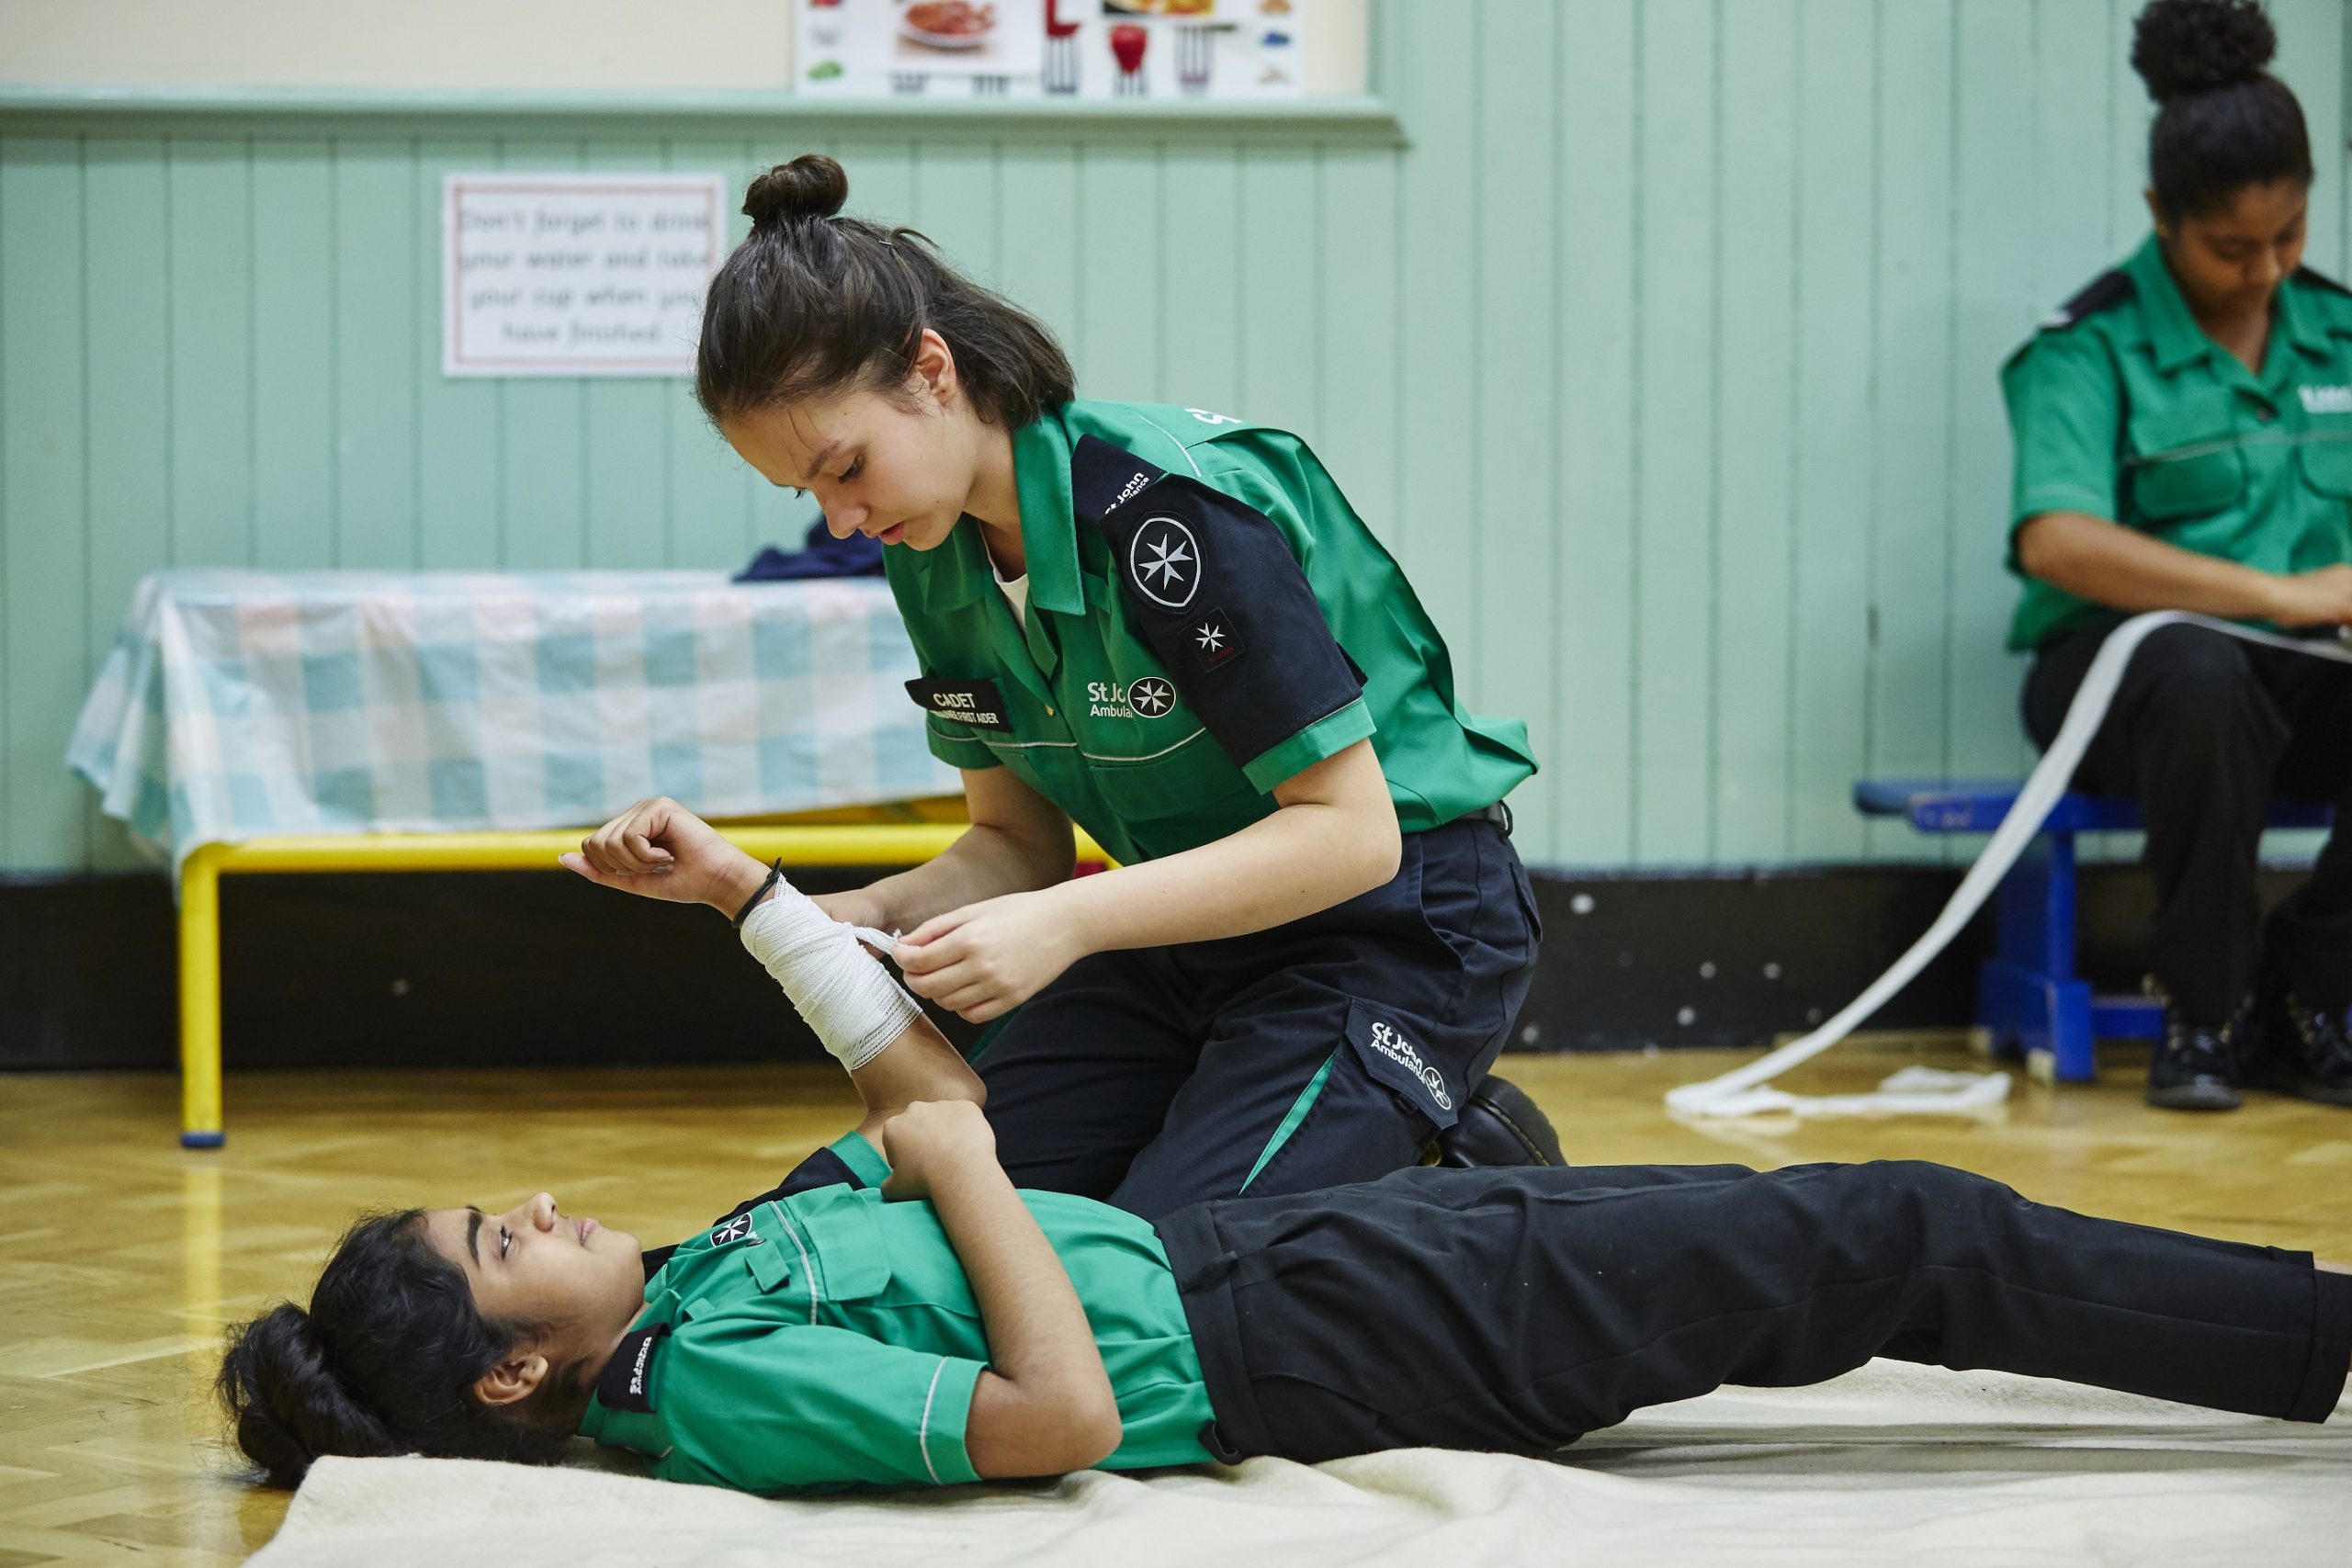 st johns ambulance first aid course for work